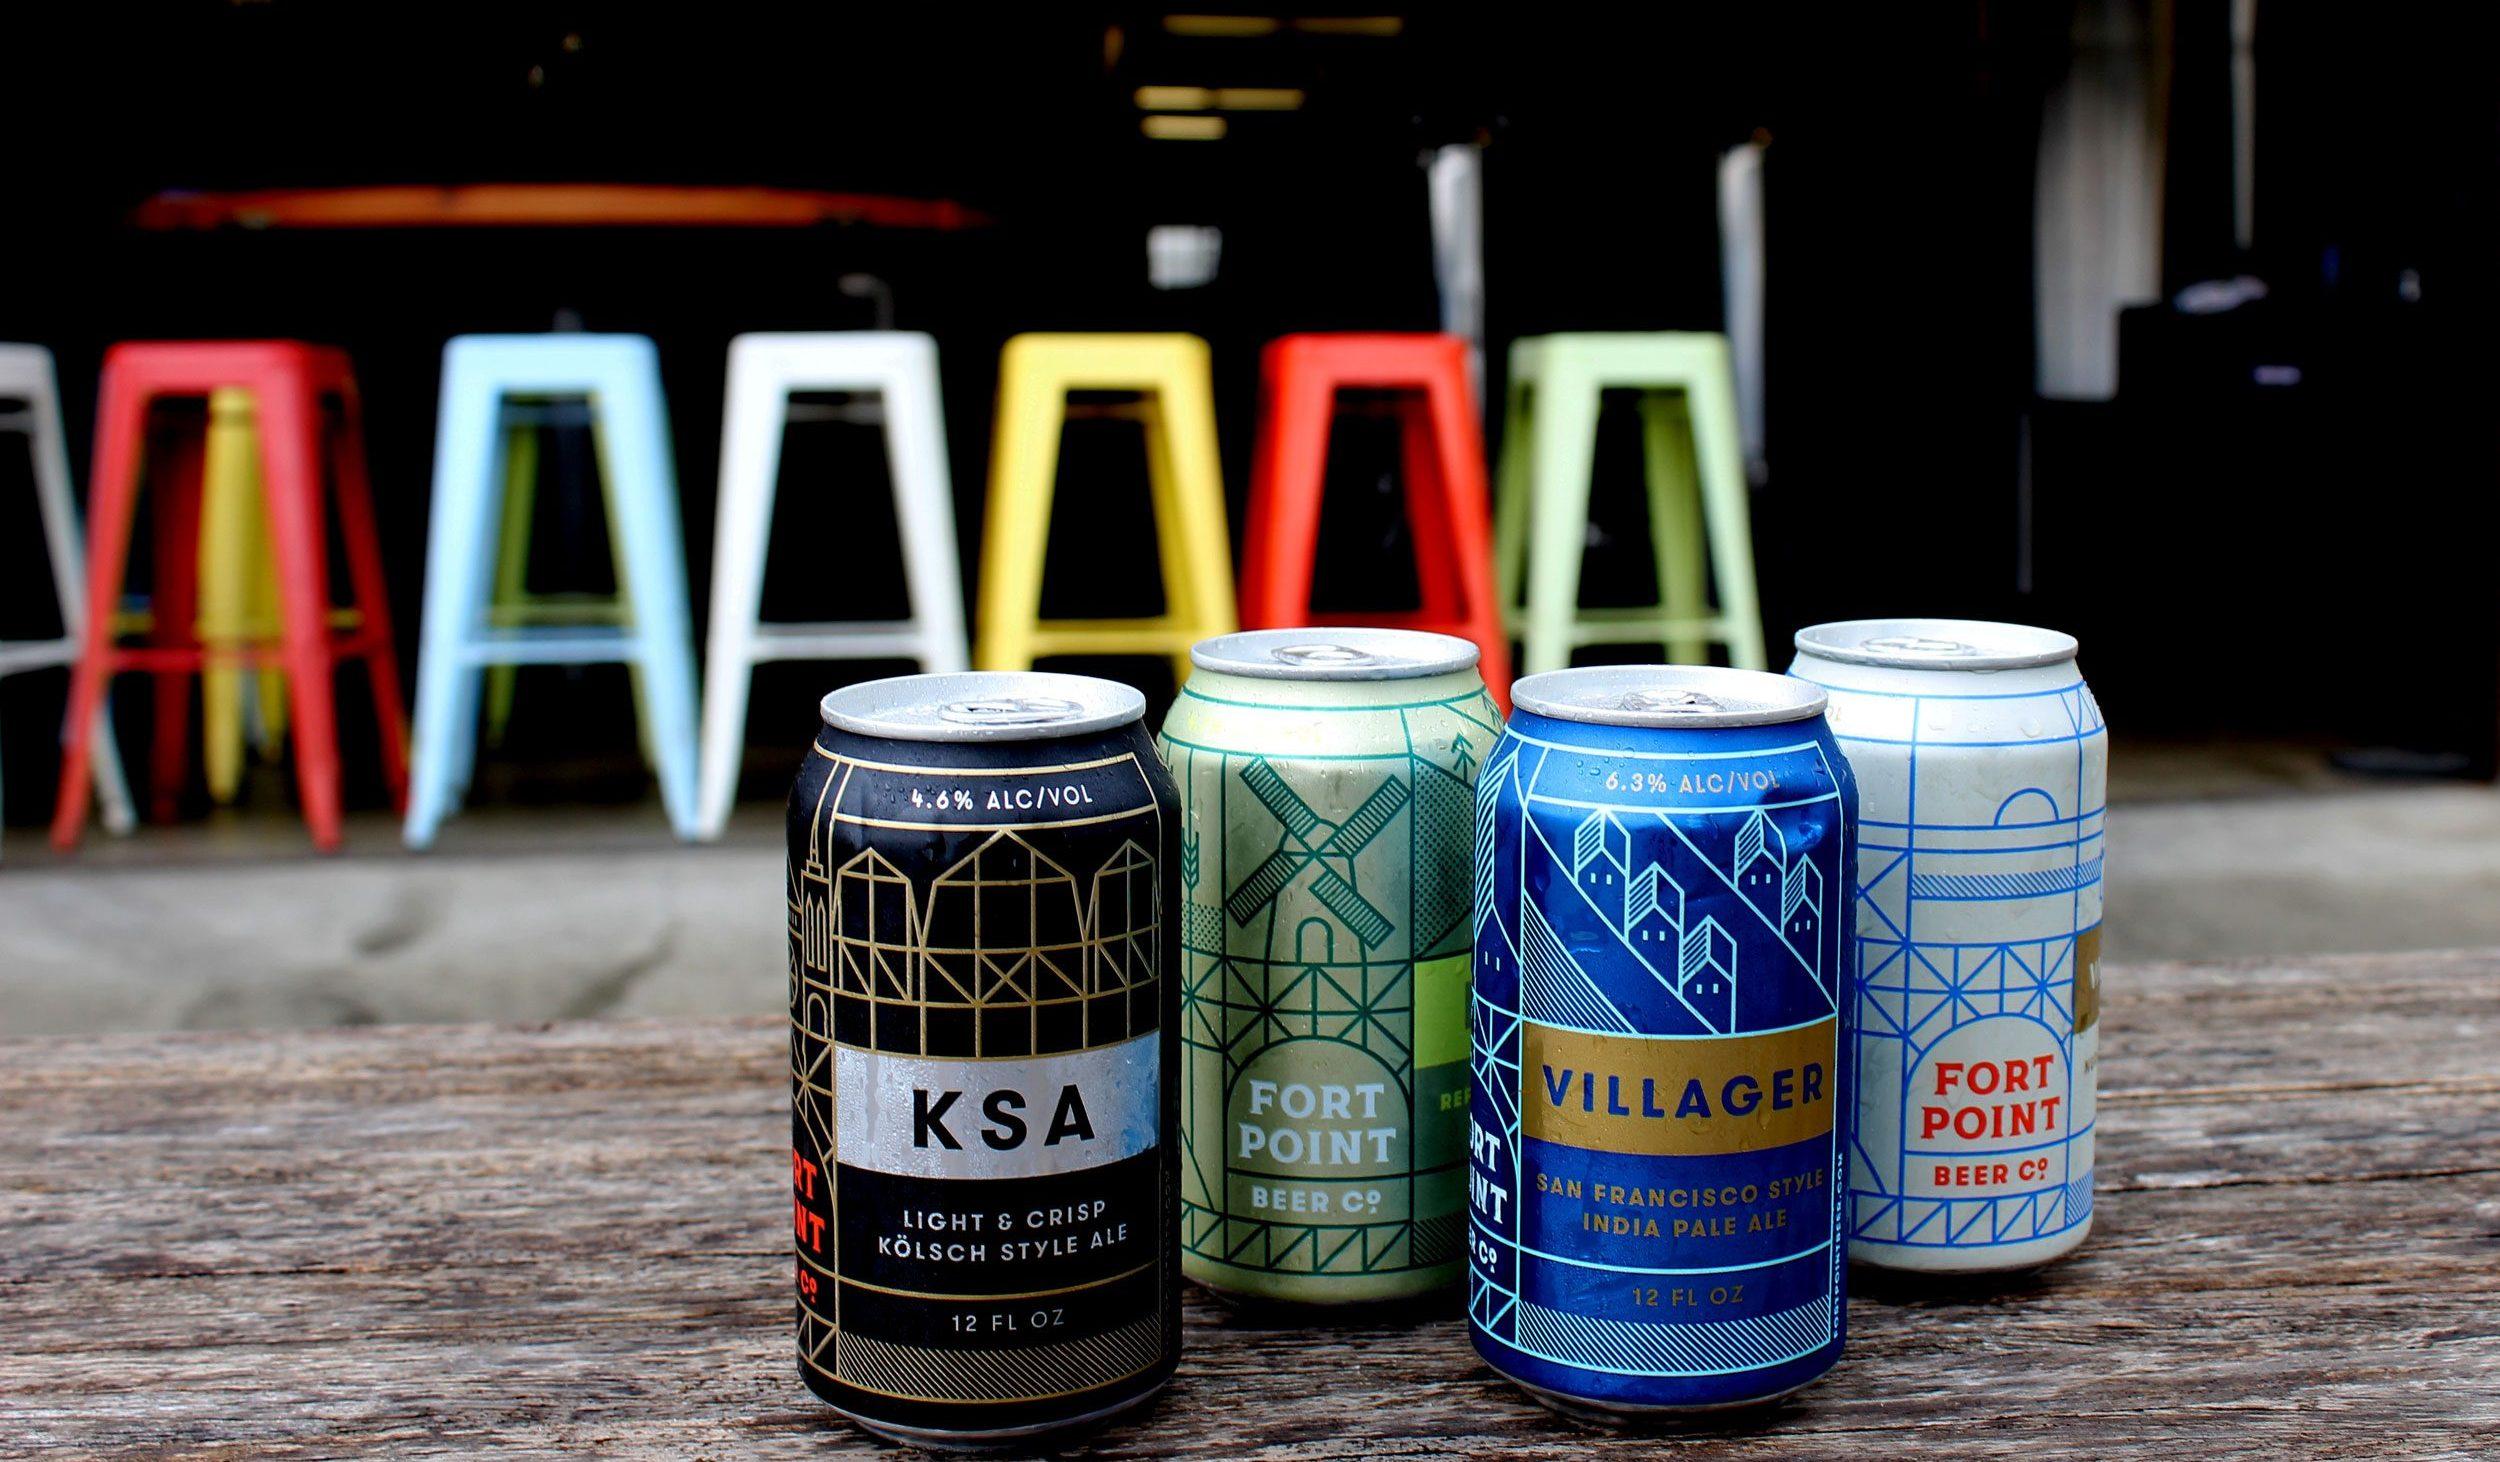 Fort Point beer cans with colorful chairs in the background